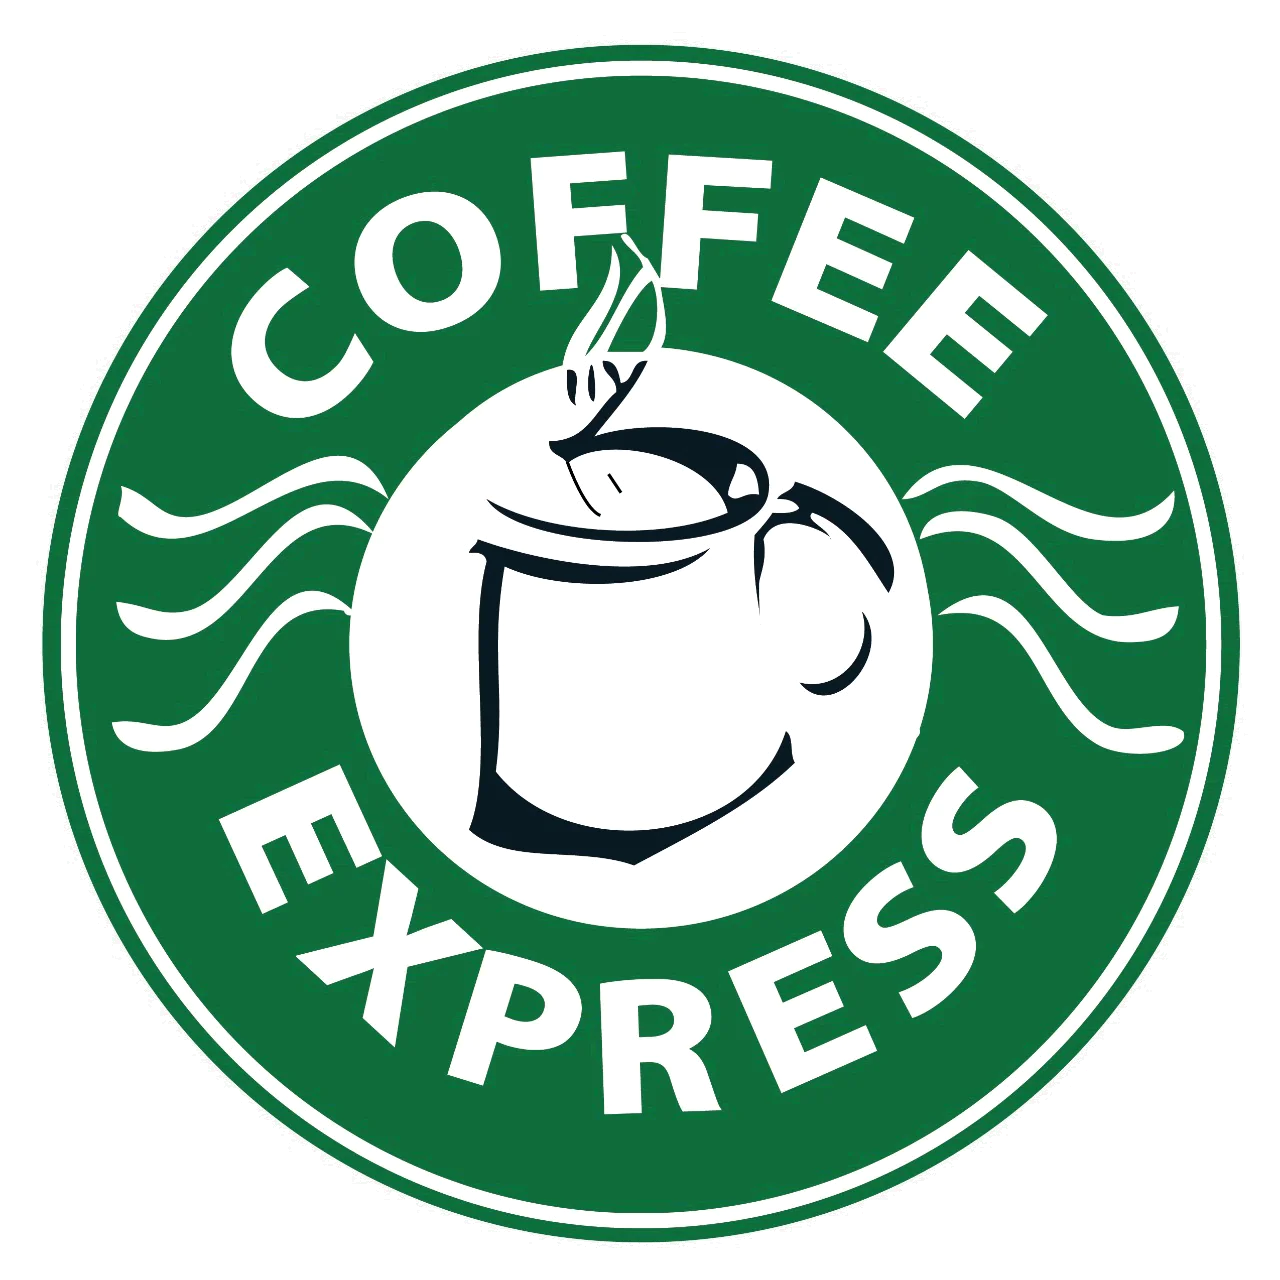 Coffee Express Limited